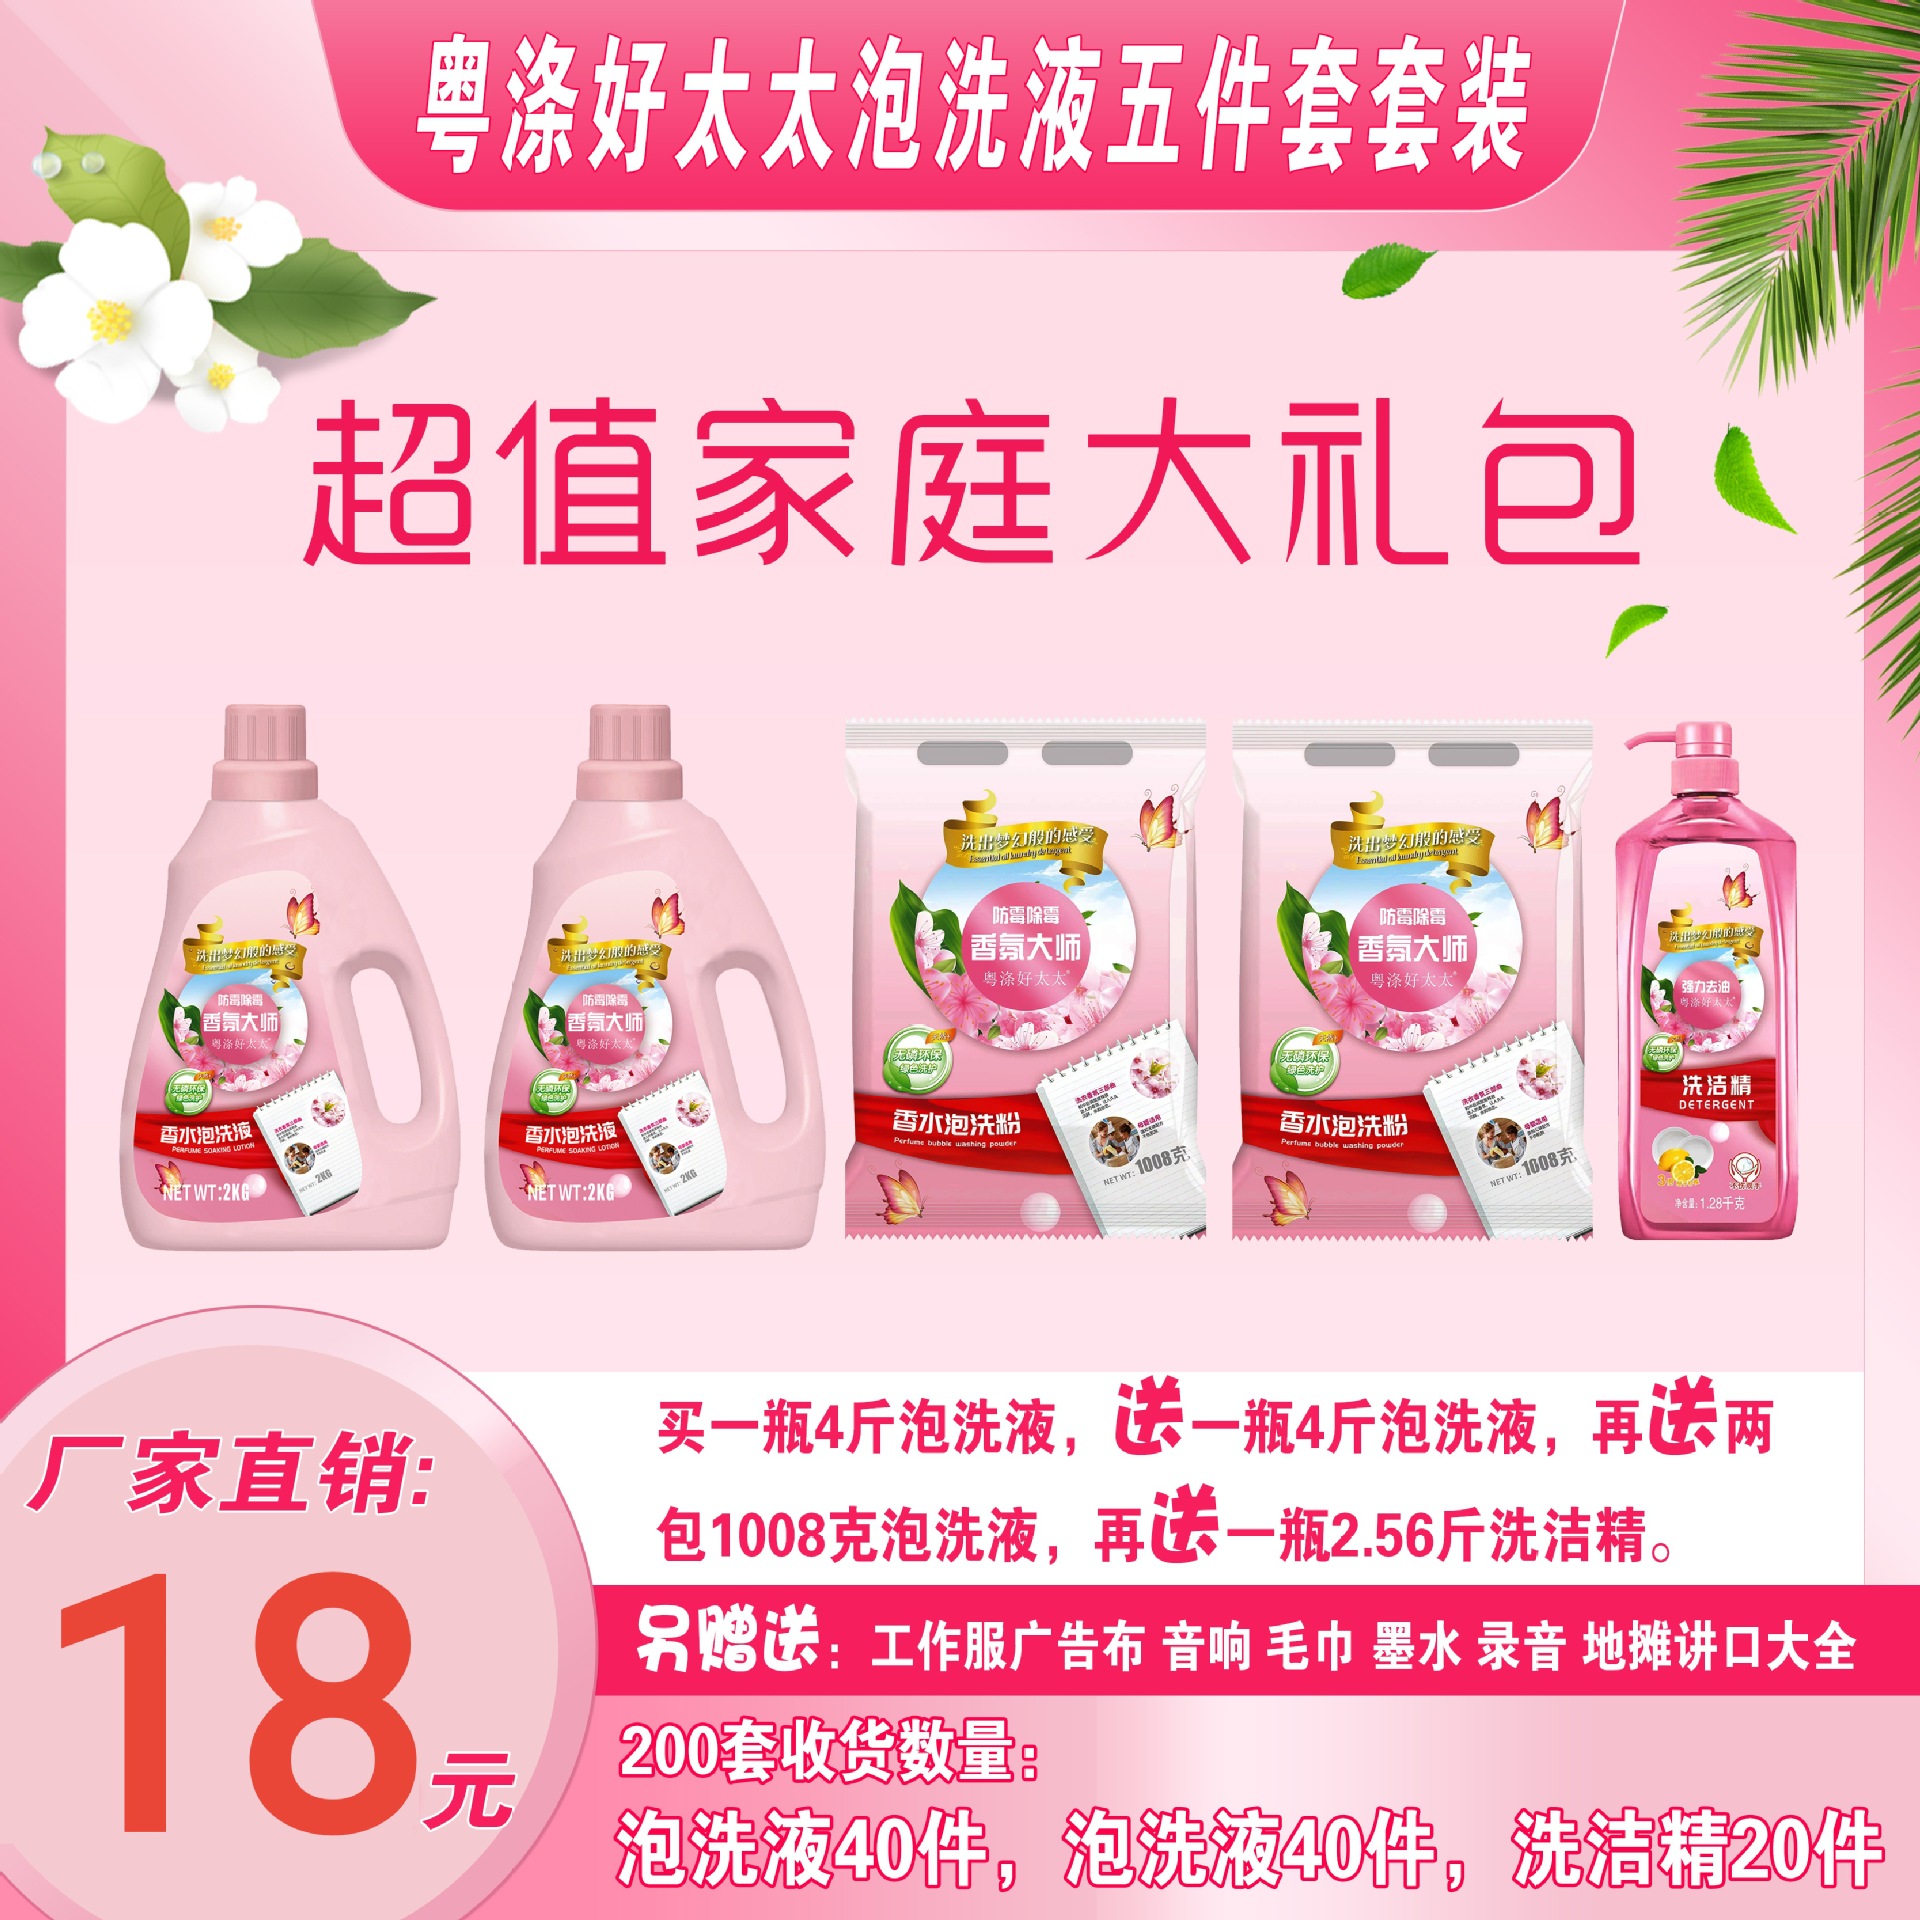 Five-Piece Daily Chemical Stall Market Hot Selling Laundry Detergent Detergent Detergent Six-Piece Laundry Detergent Five-Piece Set